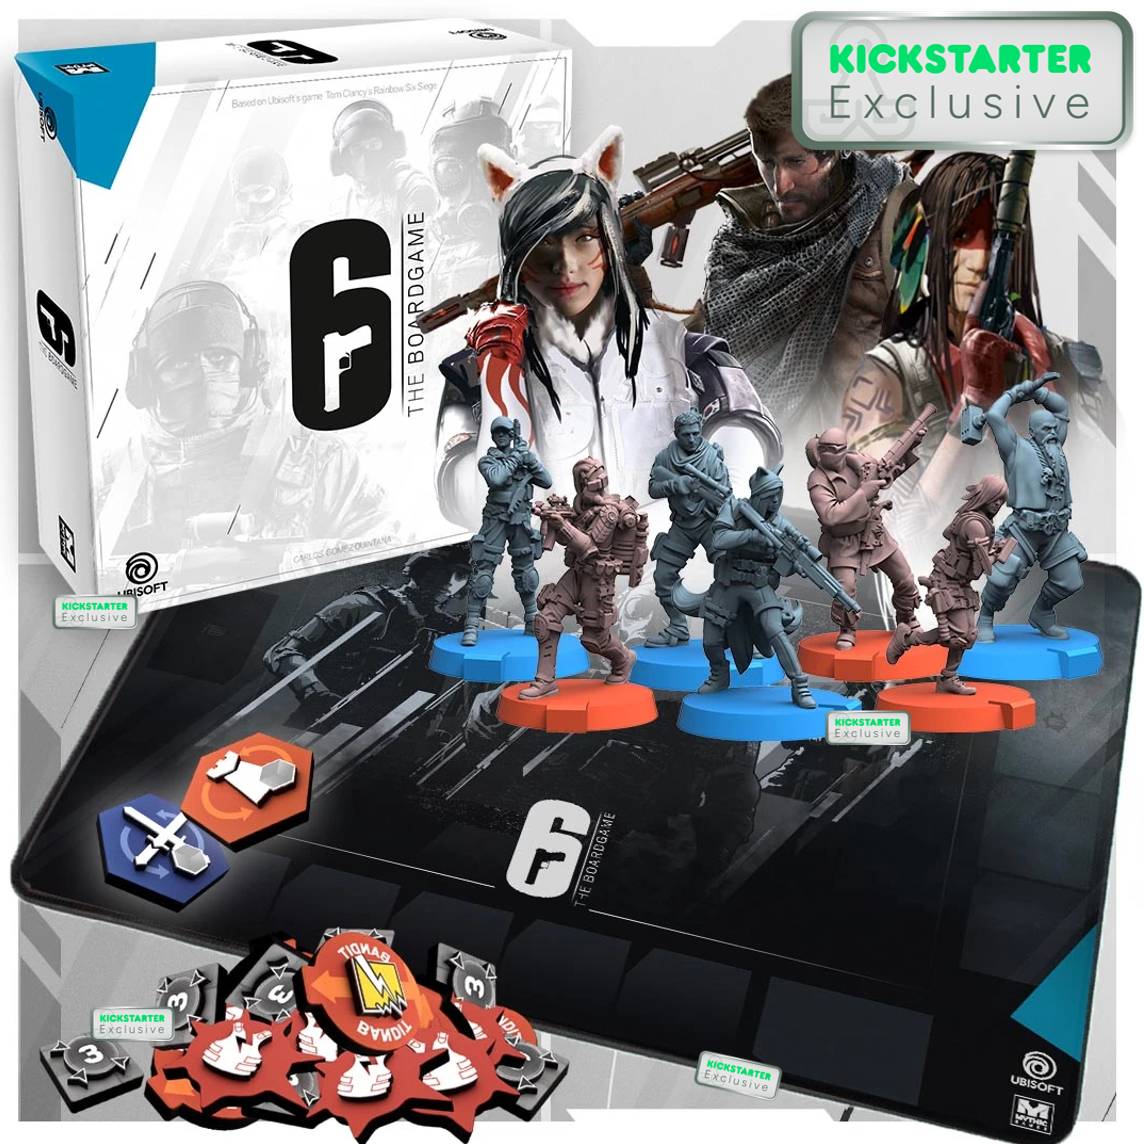 Kickstarter Exclusive Verified All-In Additions from 6: Siege - The Board Game